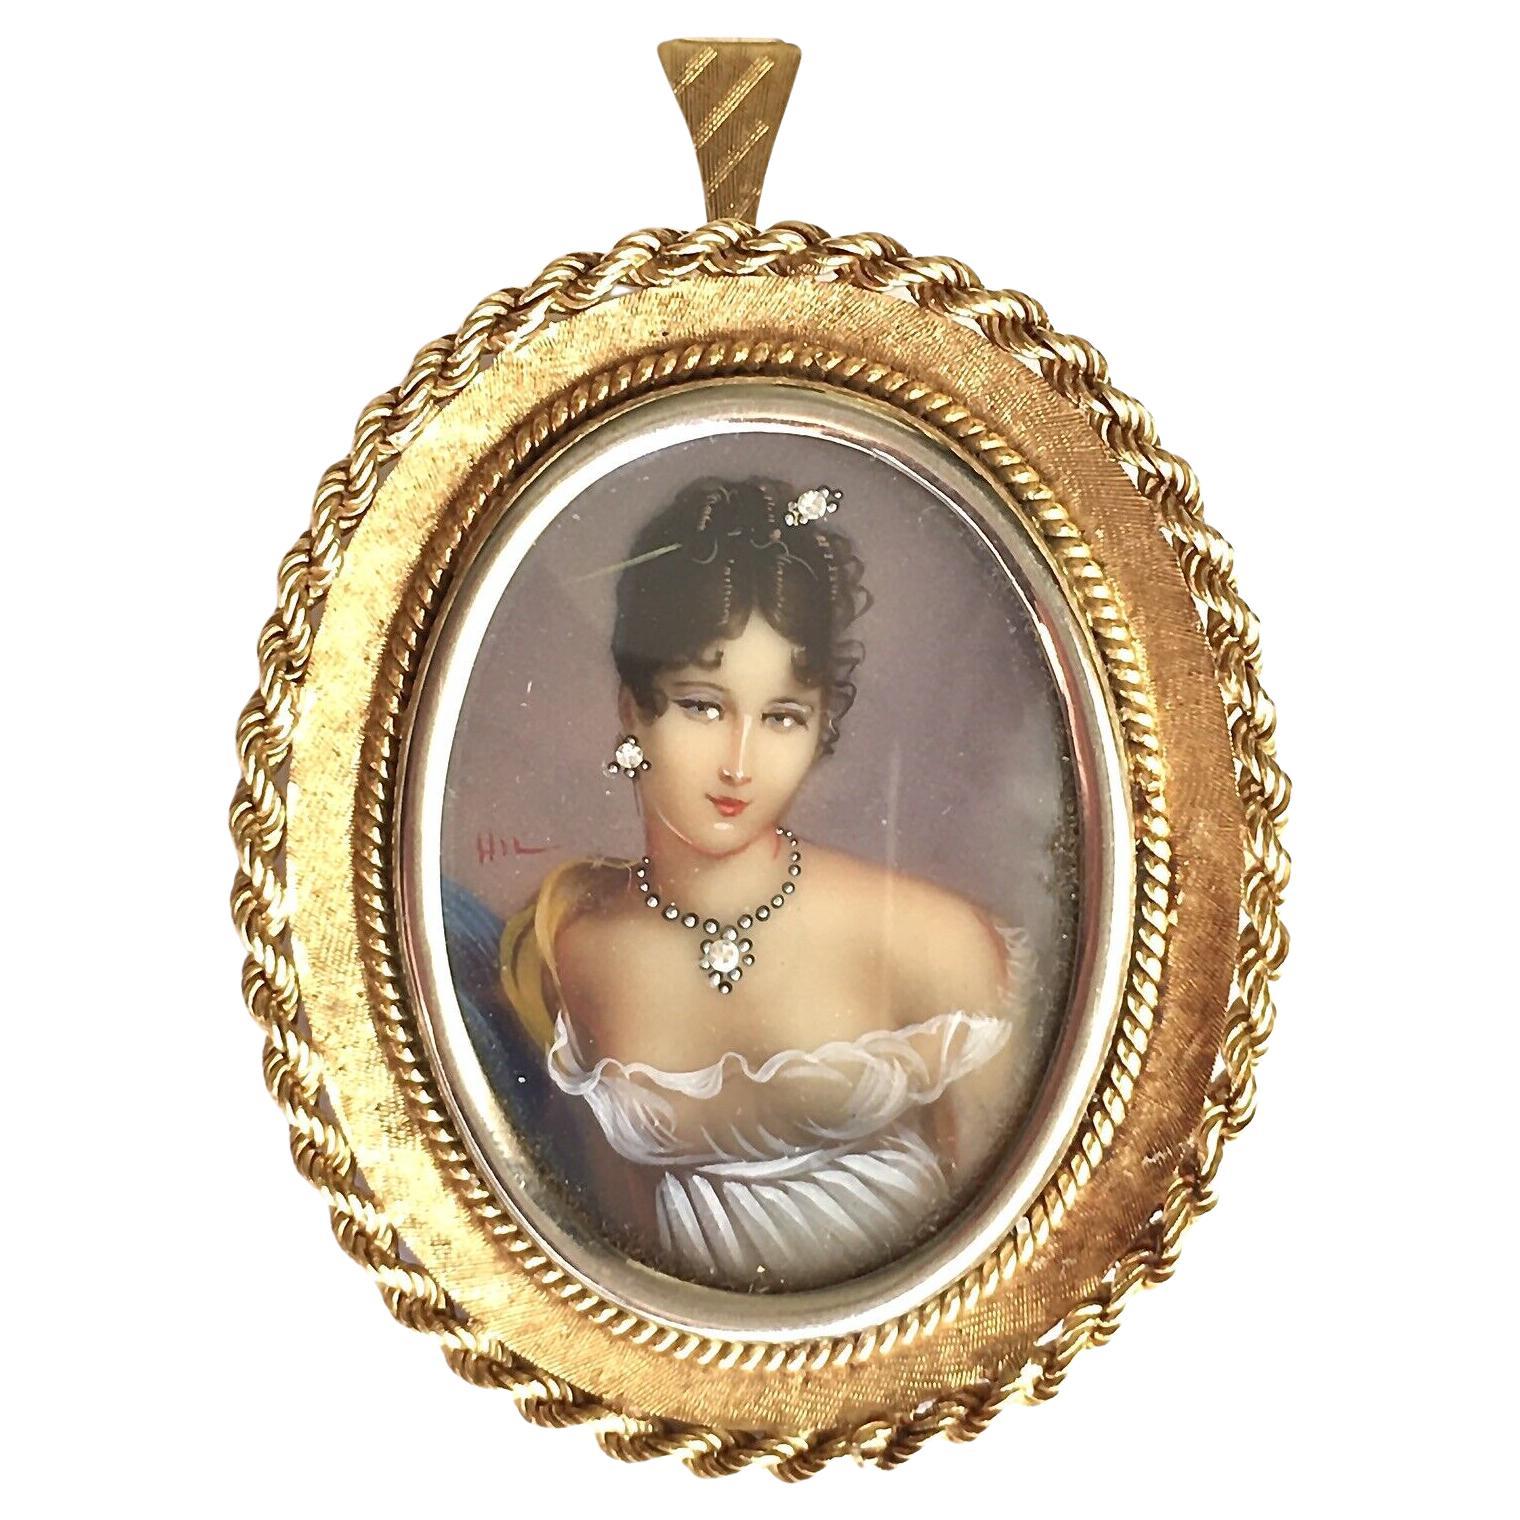 Framed 18 Karat gold Portrait of Lady in White Dress Wearing Jewelry Signed HIL For Sale